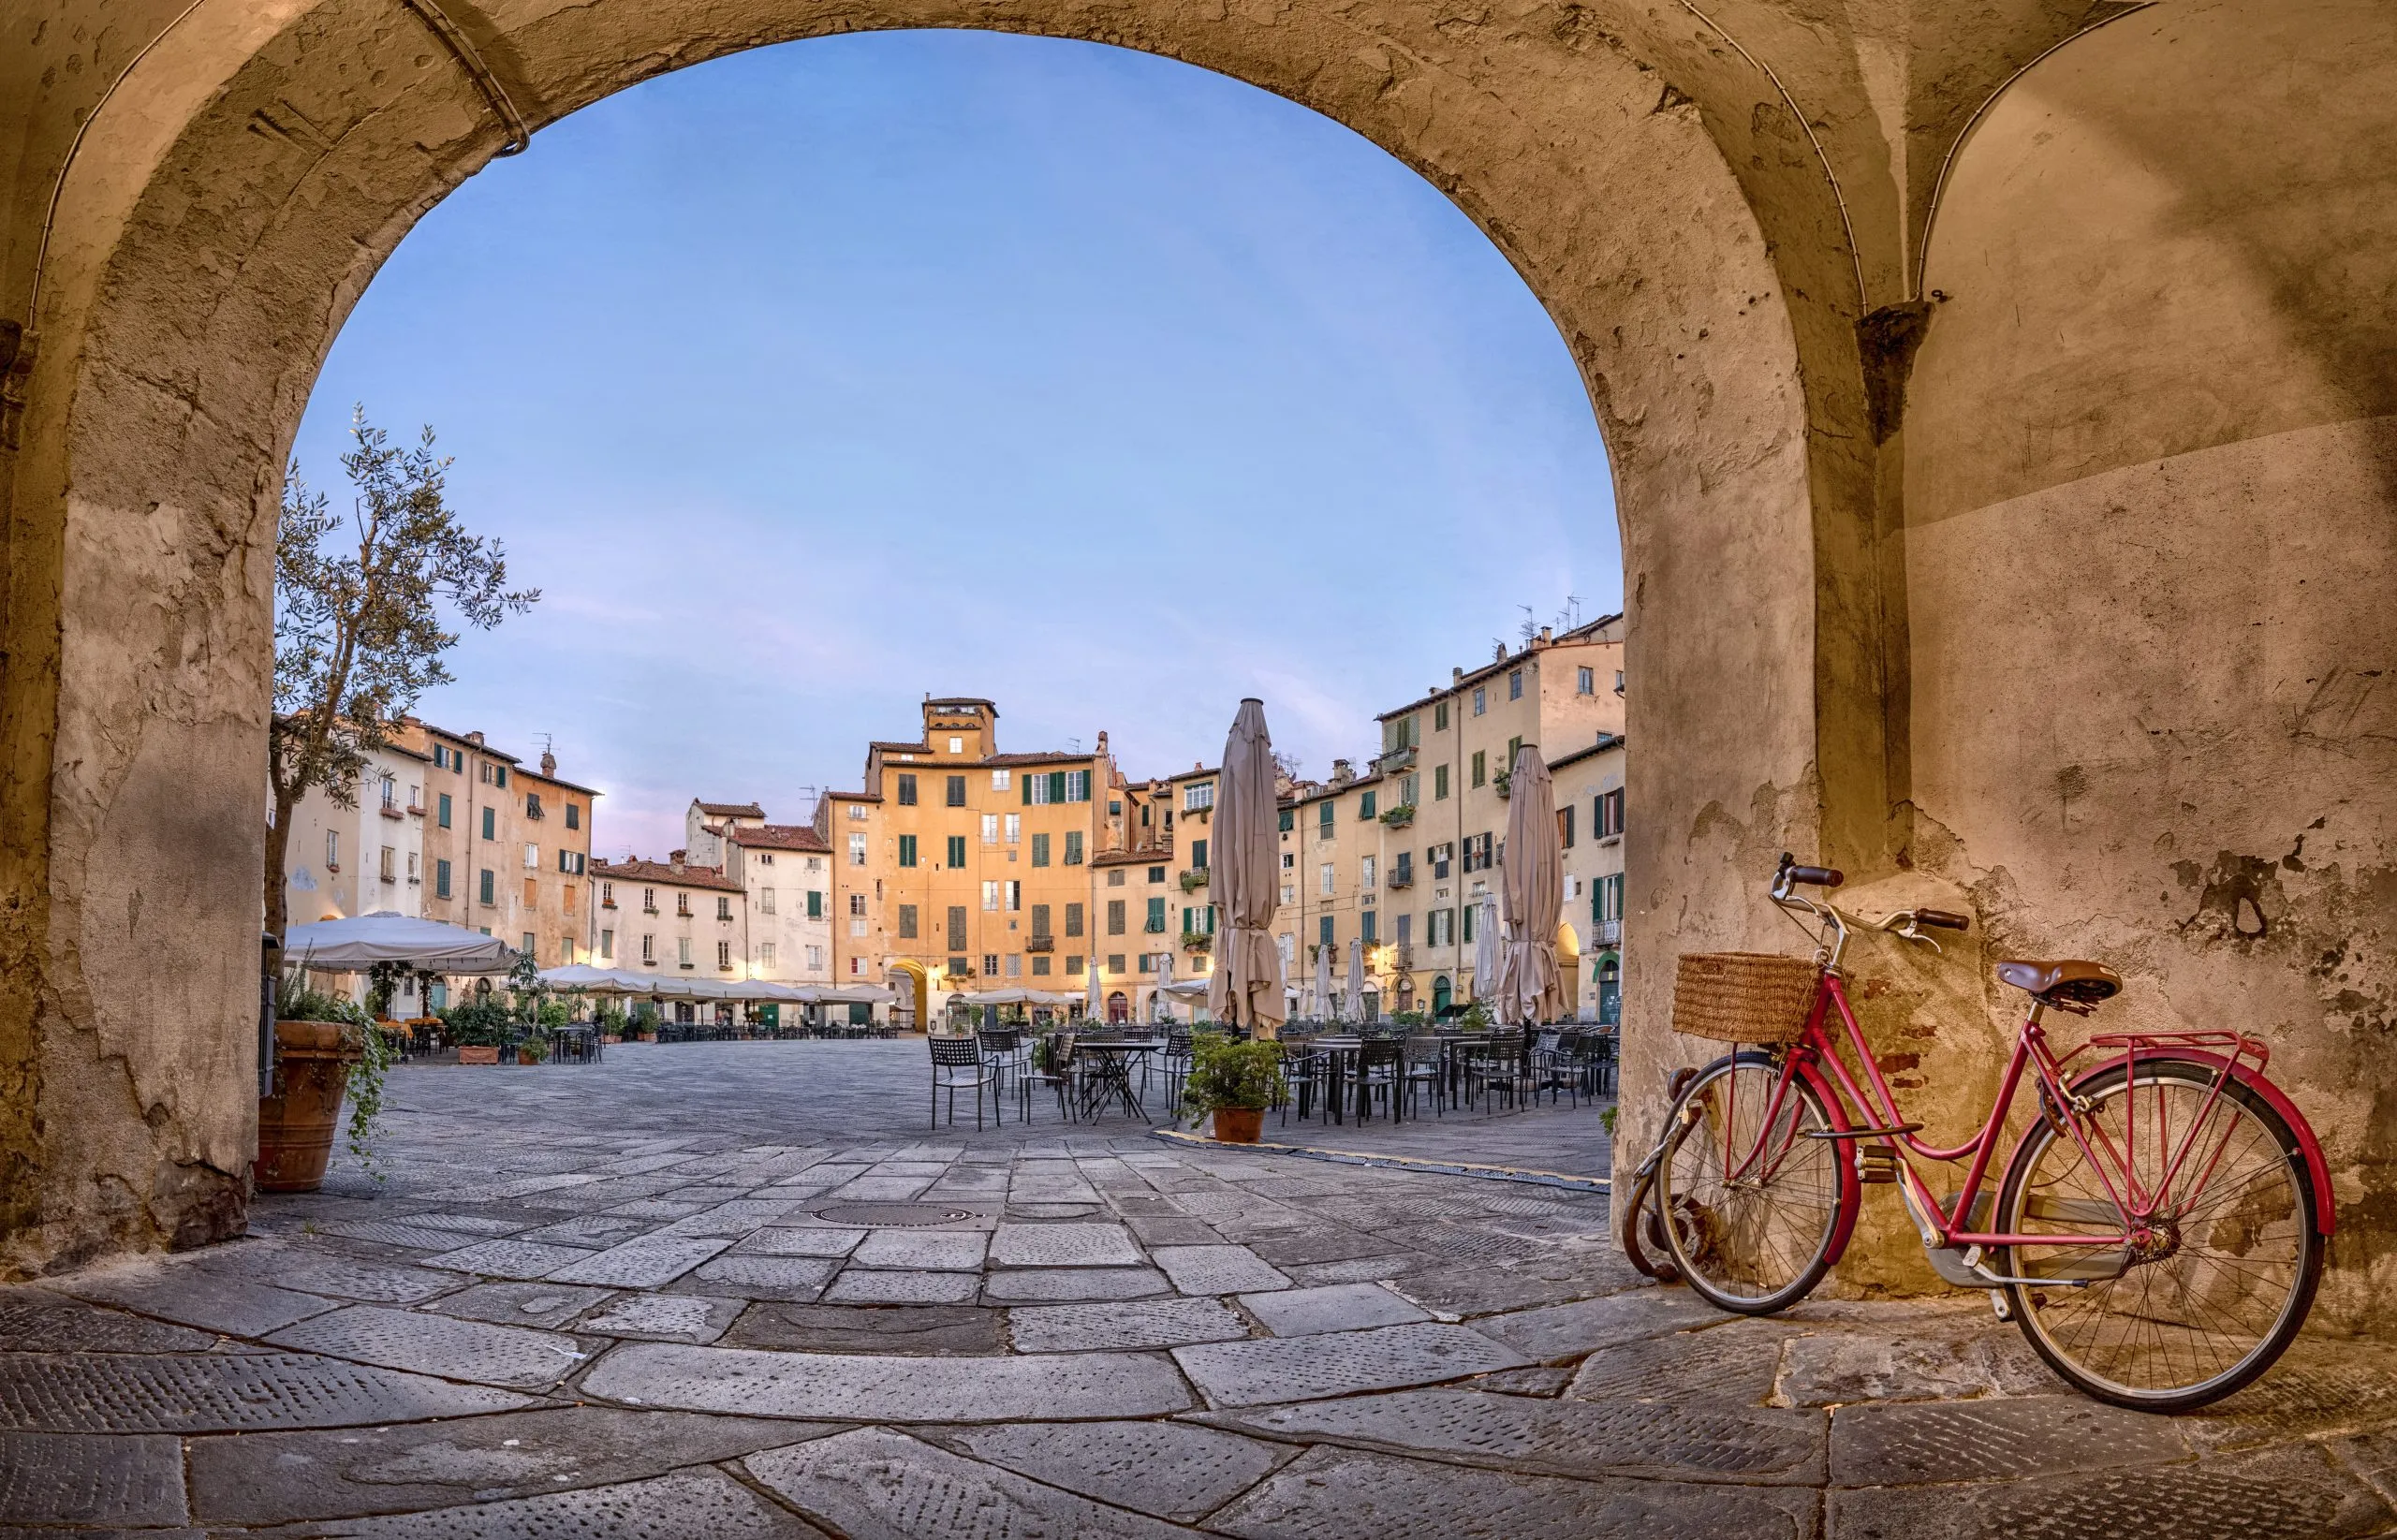 Lucca, Italy. View of Piazza dell'Anfiteatro square through the arch